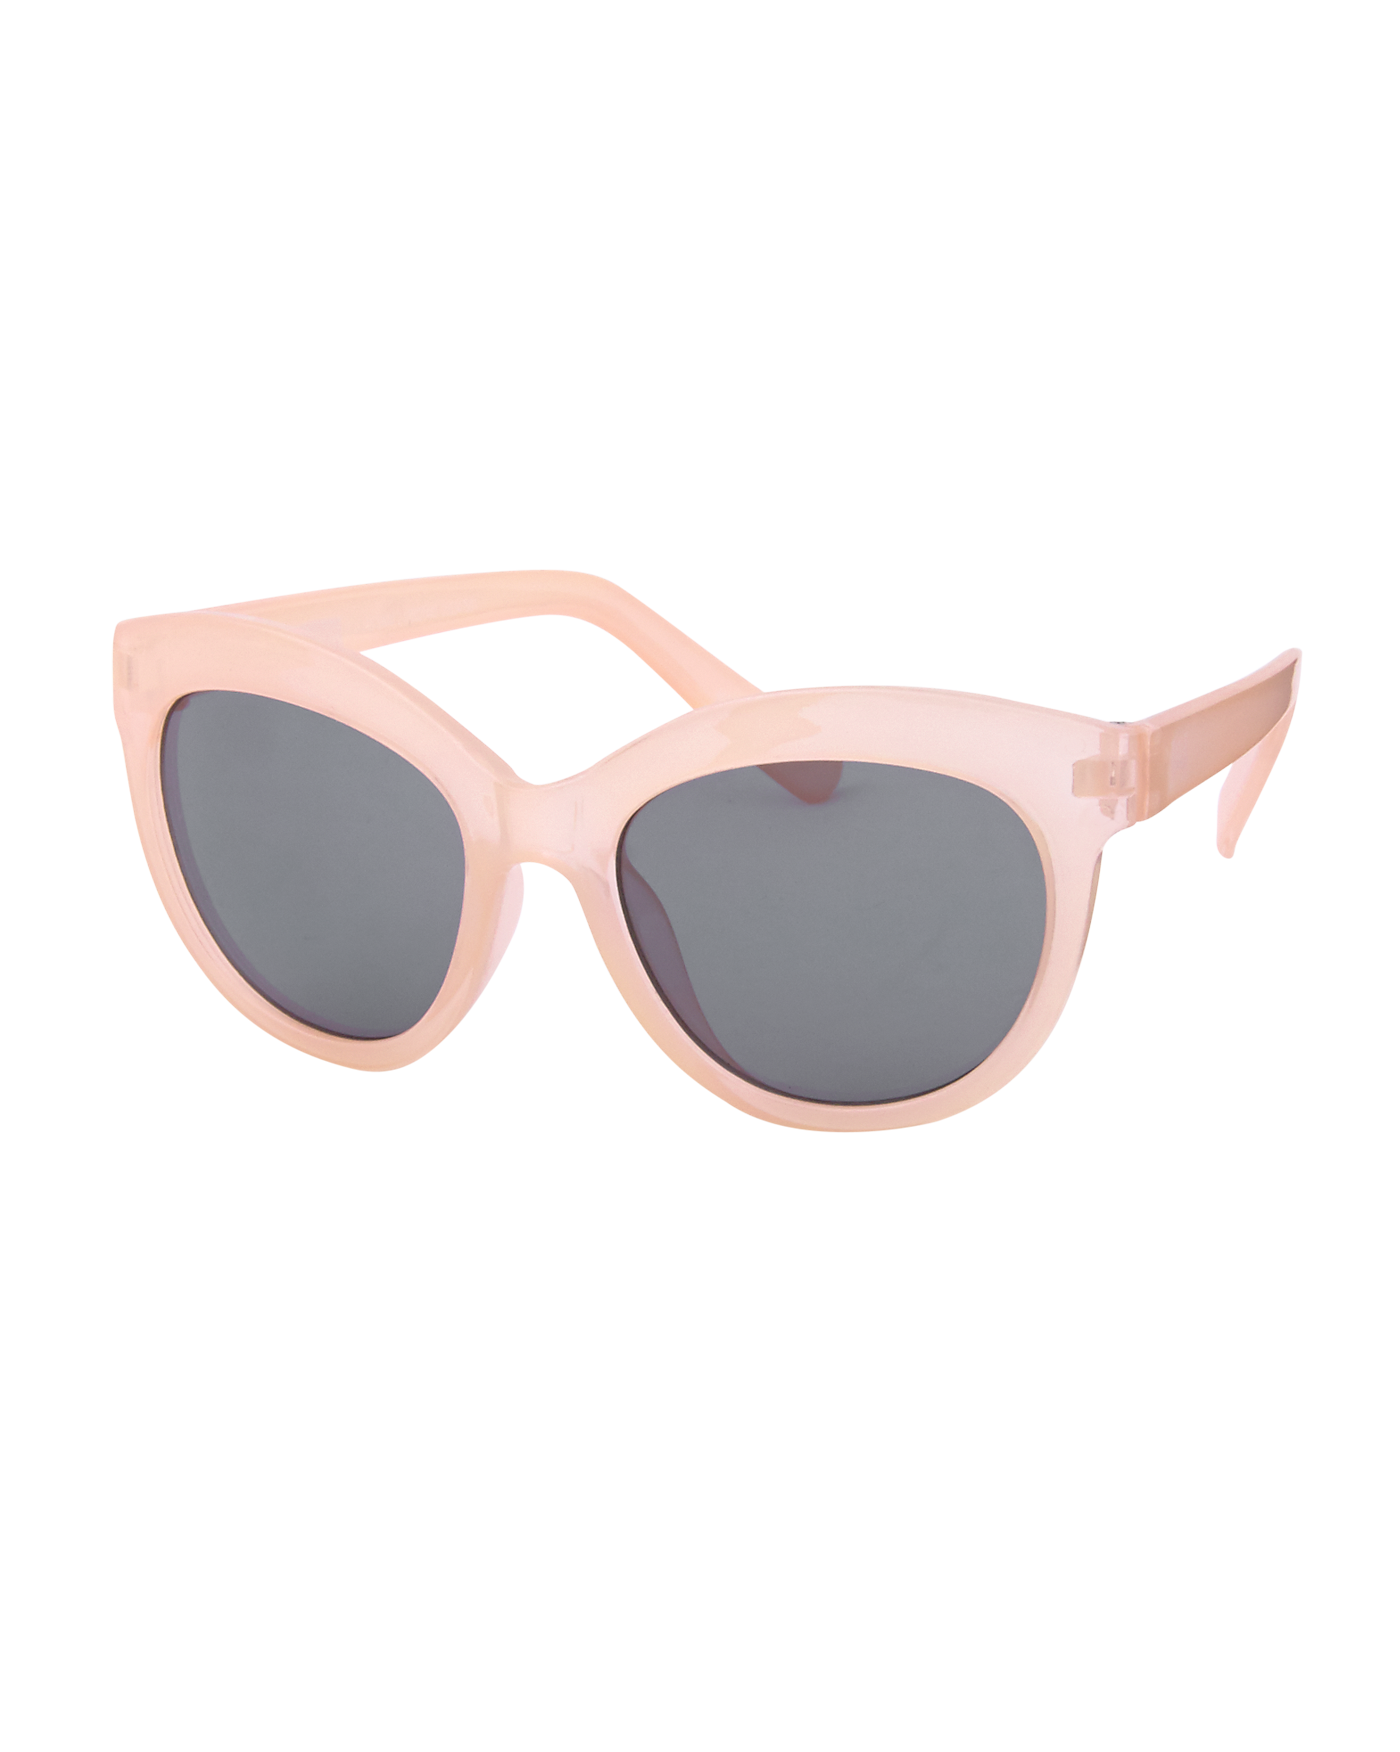 Flamingo Pink Round Sunglasses by Janie and Jack